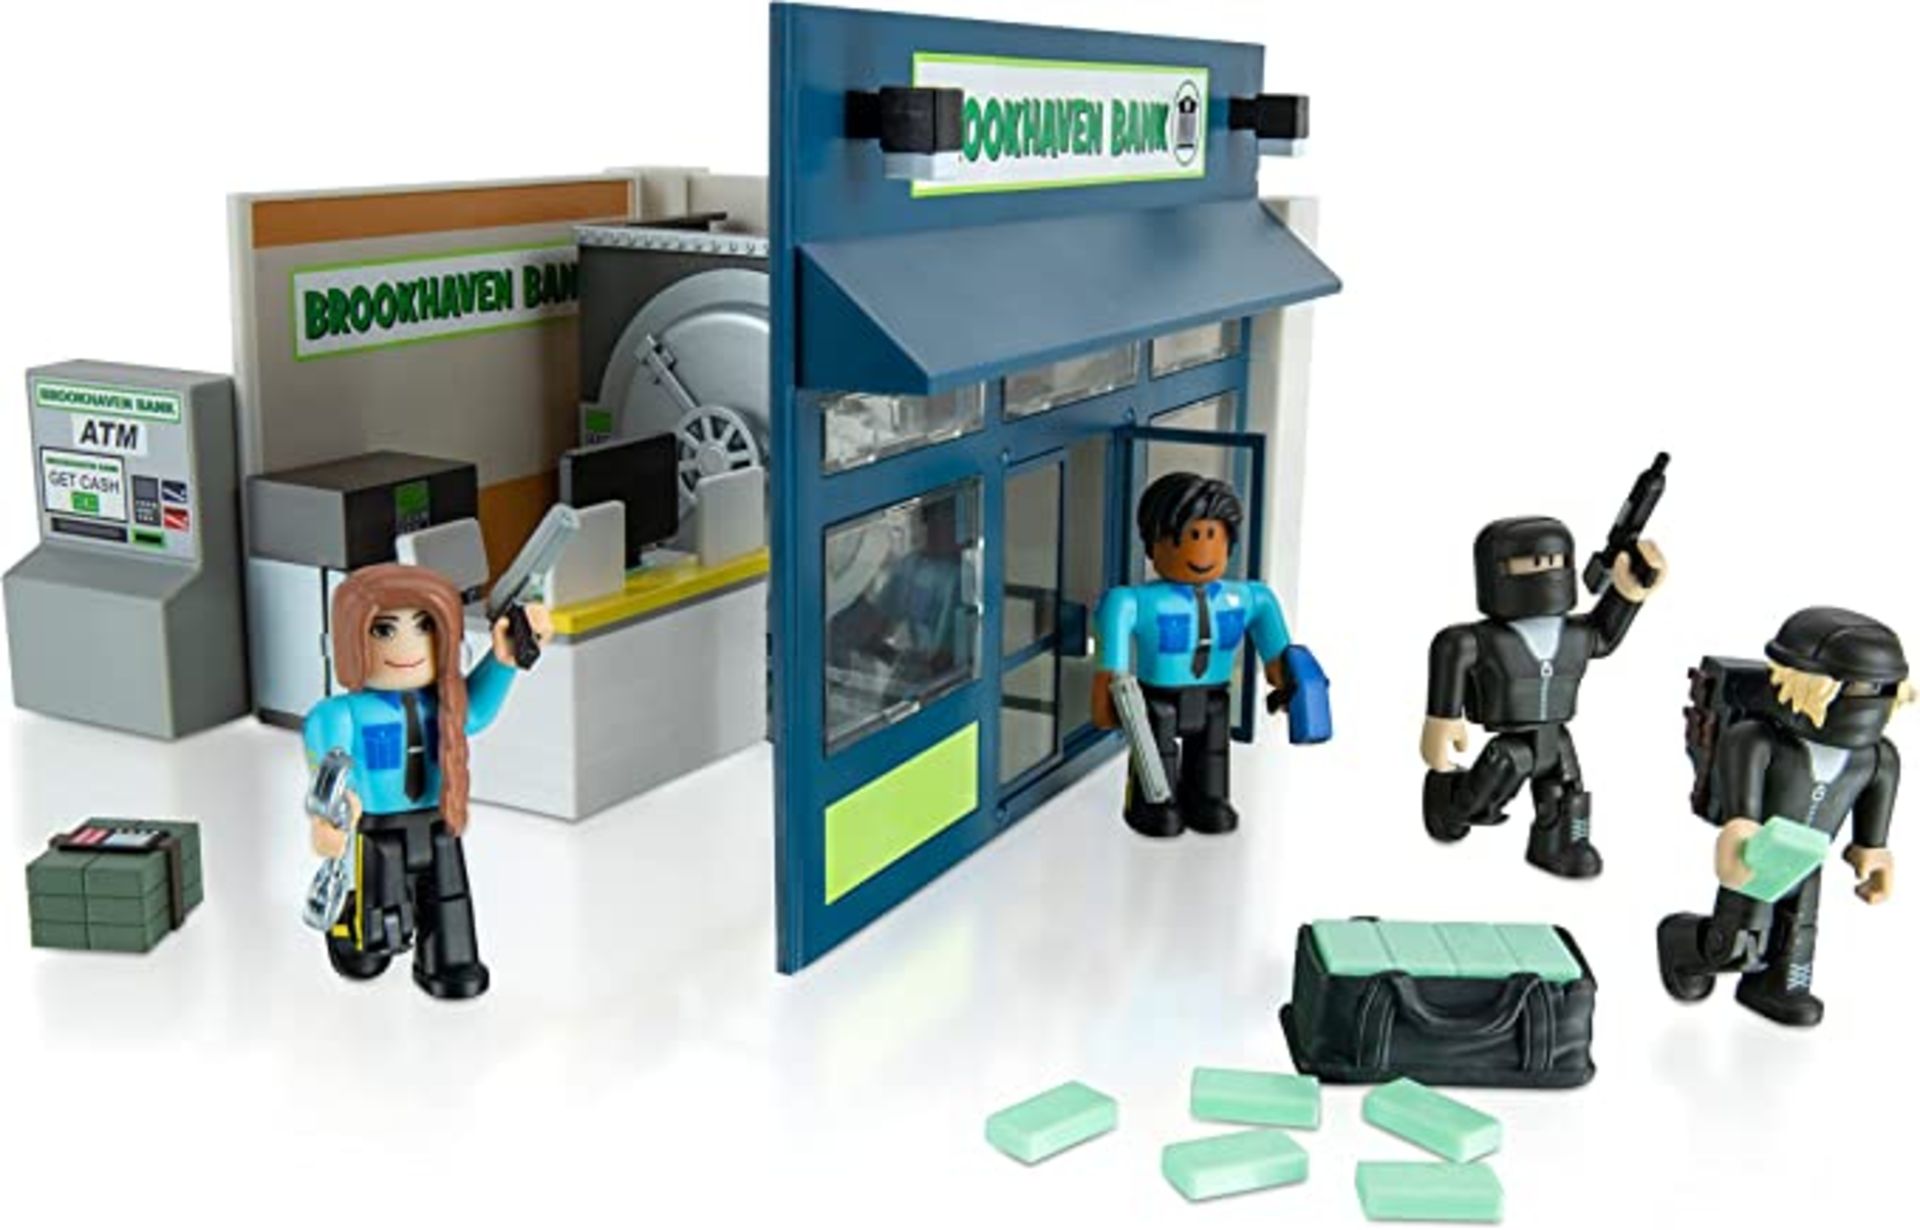 Roblox ROB0689 Deluxe Brookhaven Playset Outlaw and Order Playset, from 6 Years - SR4. Where there